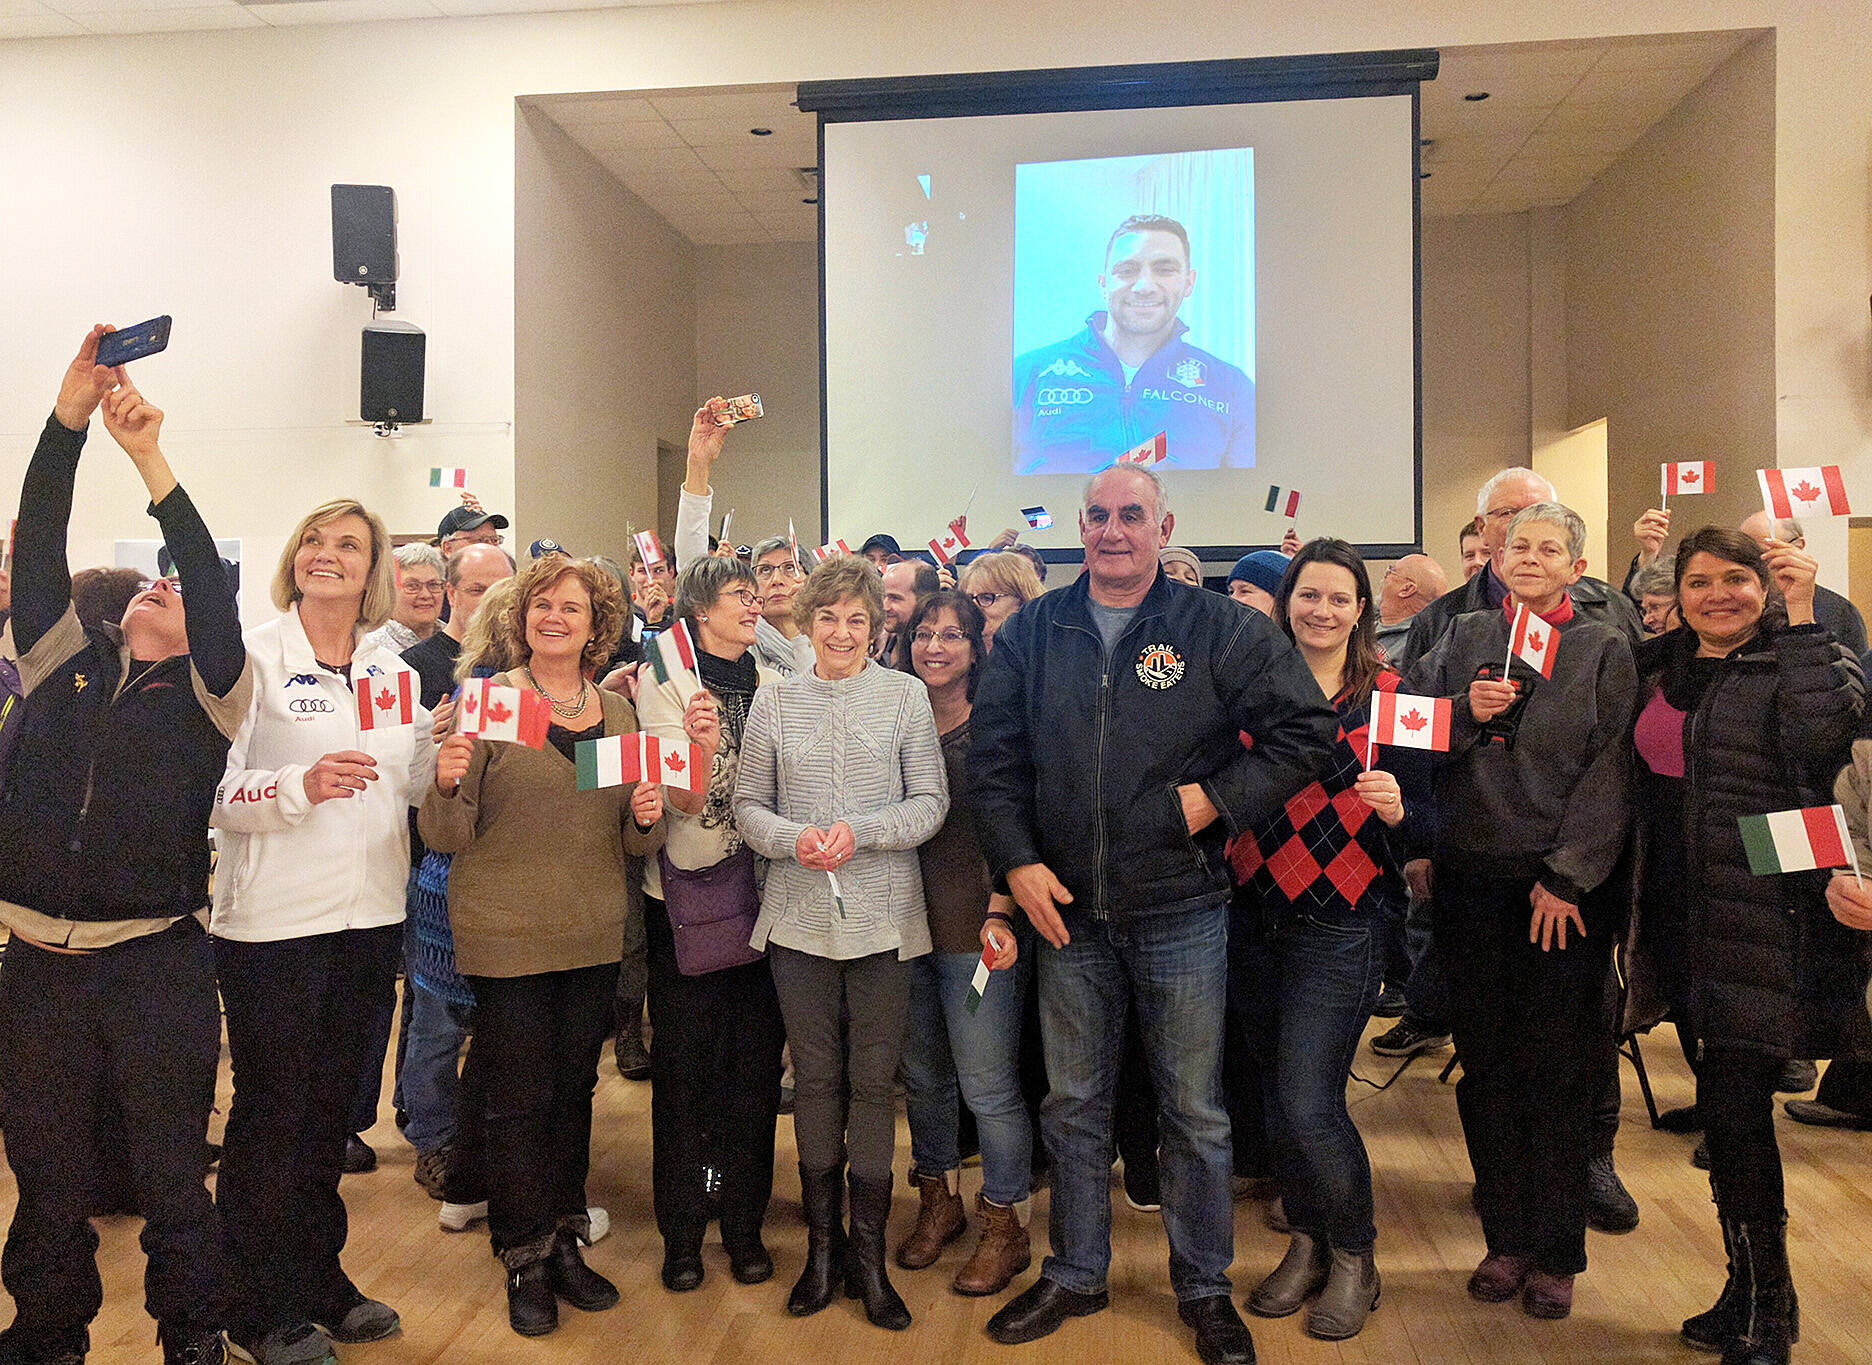 About 100 Joe Cecchini supporters gathered for a Go Joe Go! rally and a group selfie at the Fruitvale Hall in January, 2018. Cecchini appeared via Zoom to thank the Greater Trail community for its support as he prepared to compete in skeleton at the 2018 Winter Olympic Games in South Korea. Photo: Jim Bailey